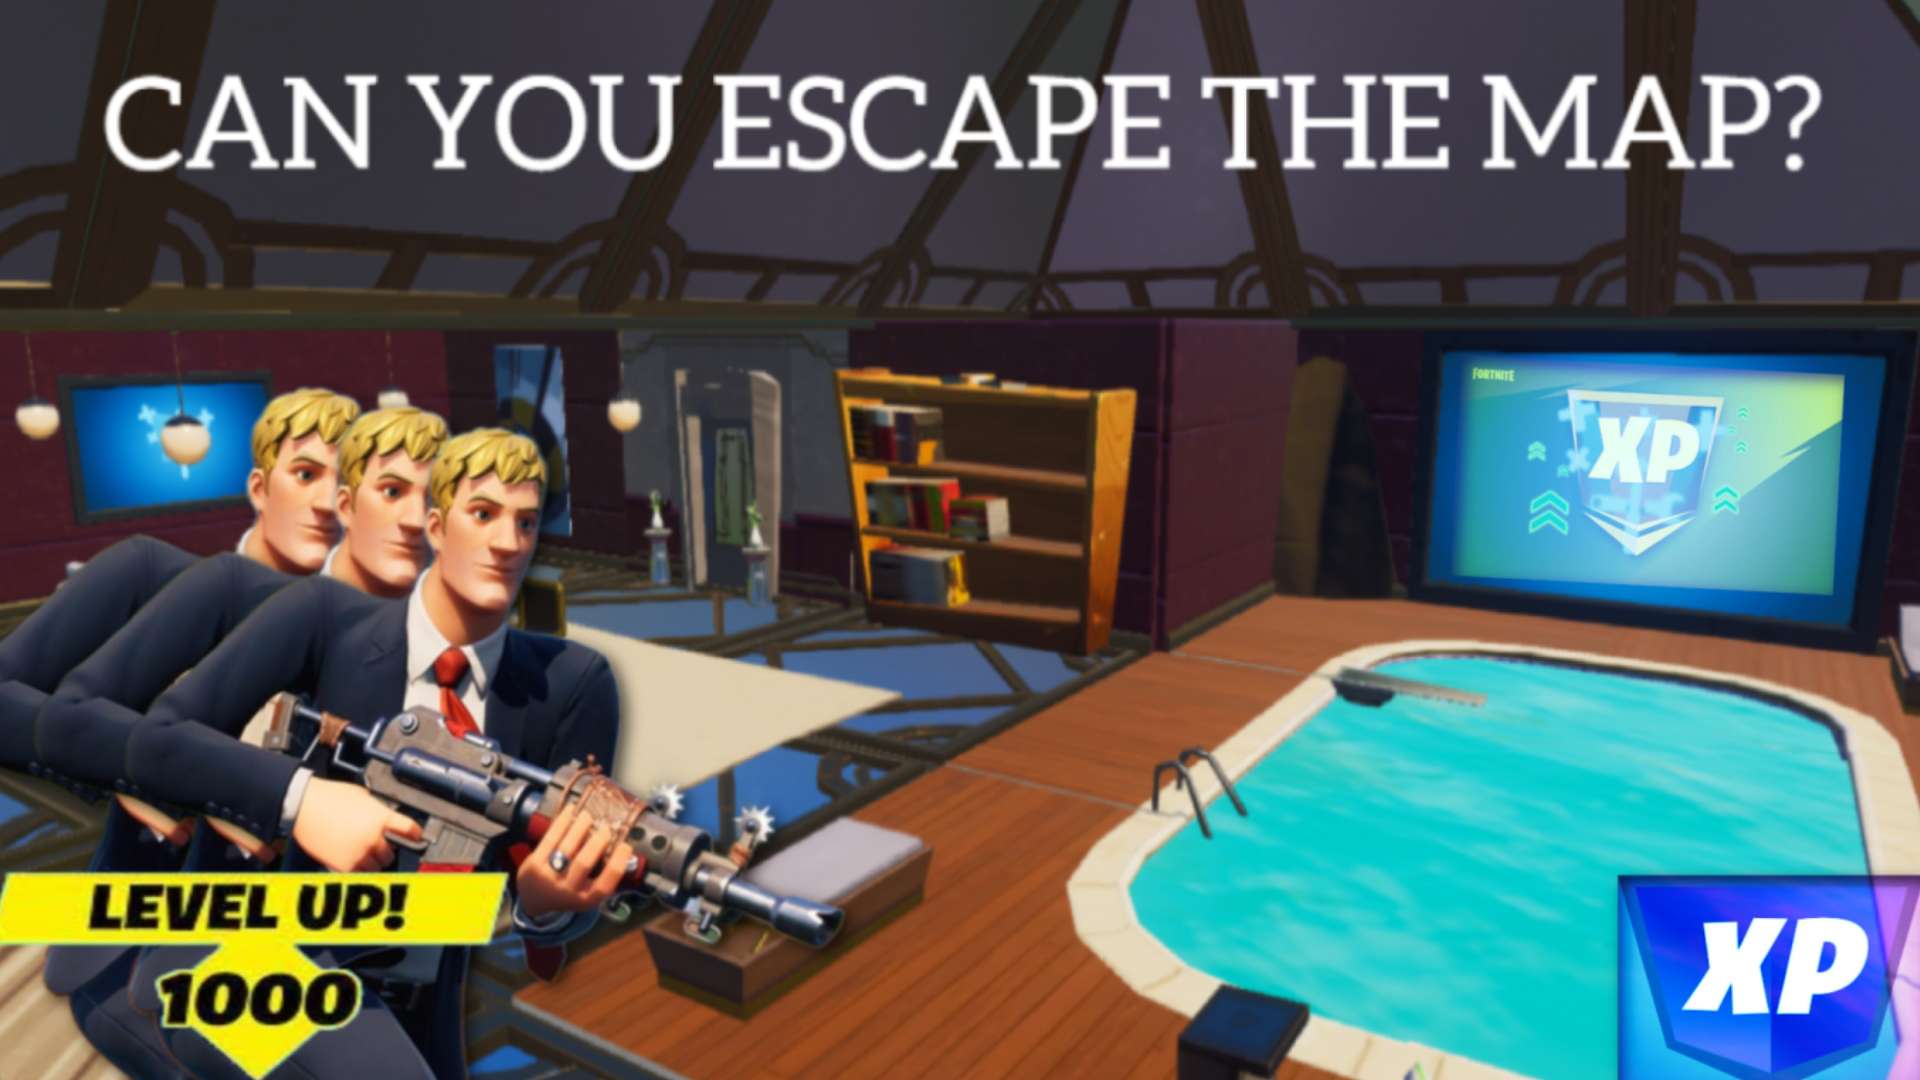 CAN YOU ESCAPE THE MAP?